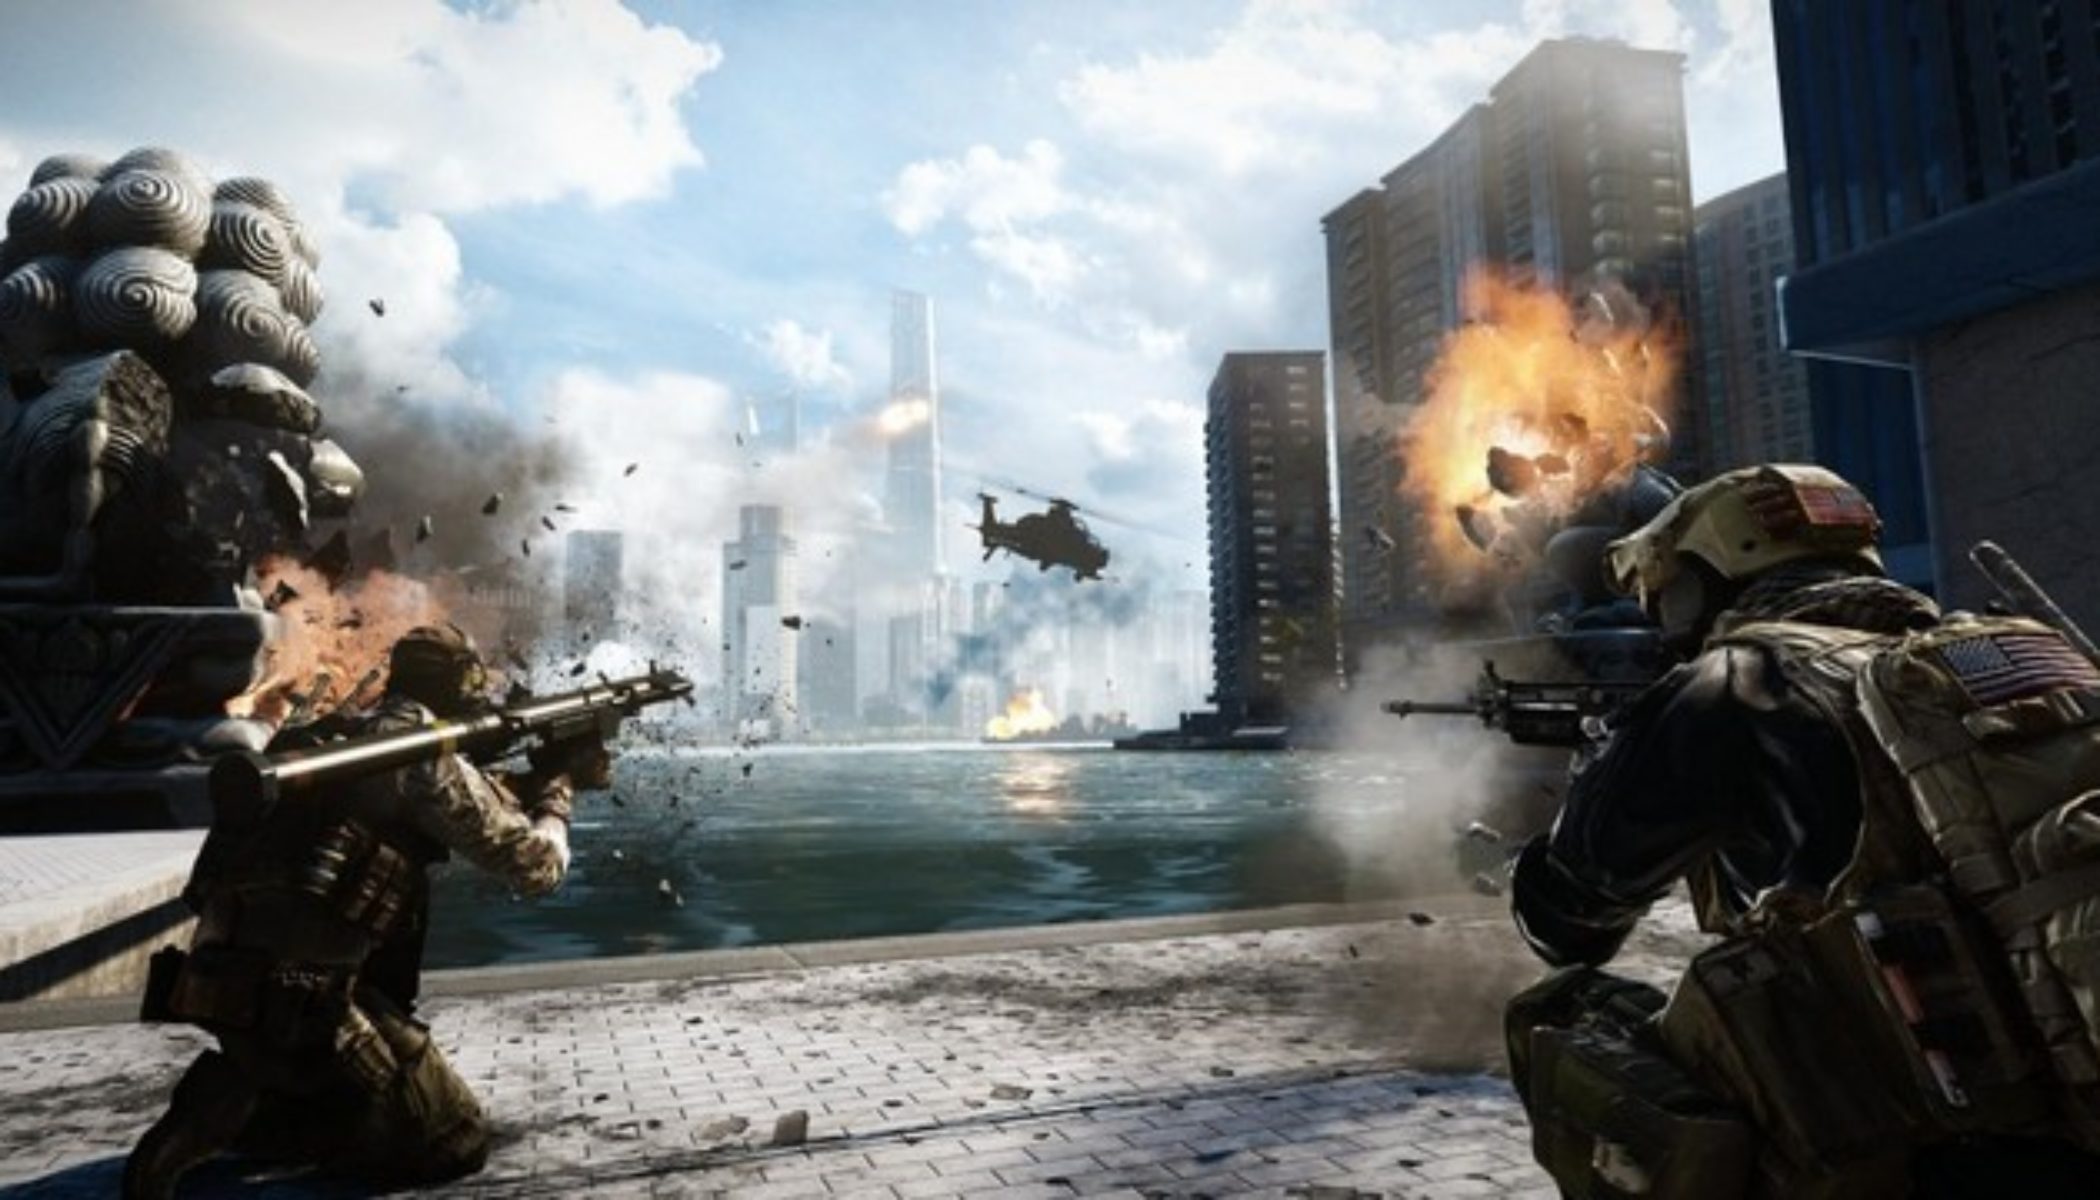 Battlefield 2042 - Conquest 64 VS 64 Gameplay on PC - IGN